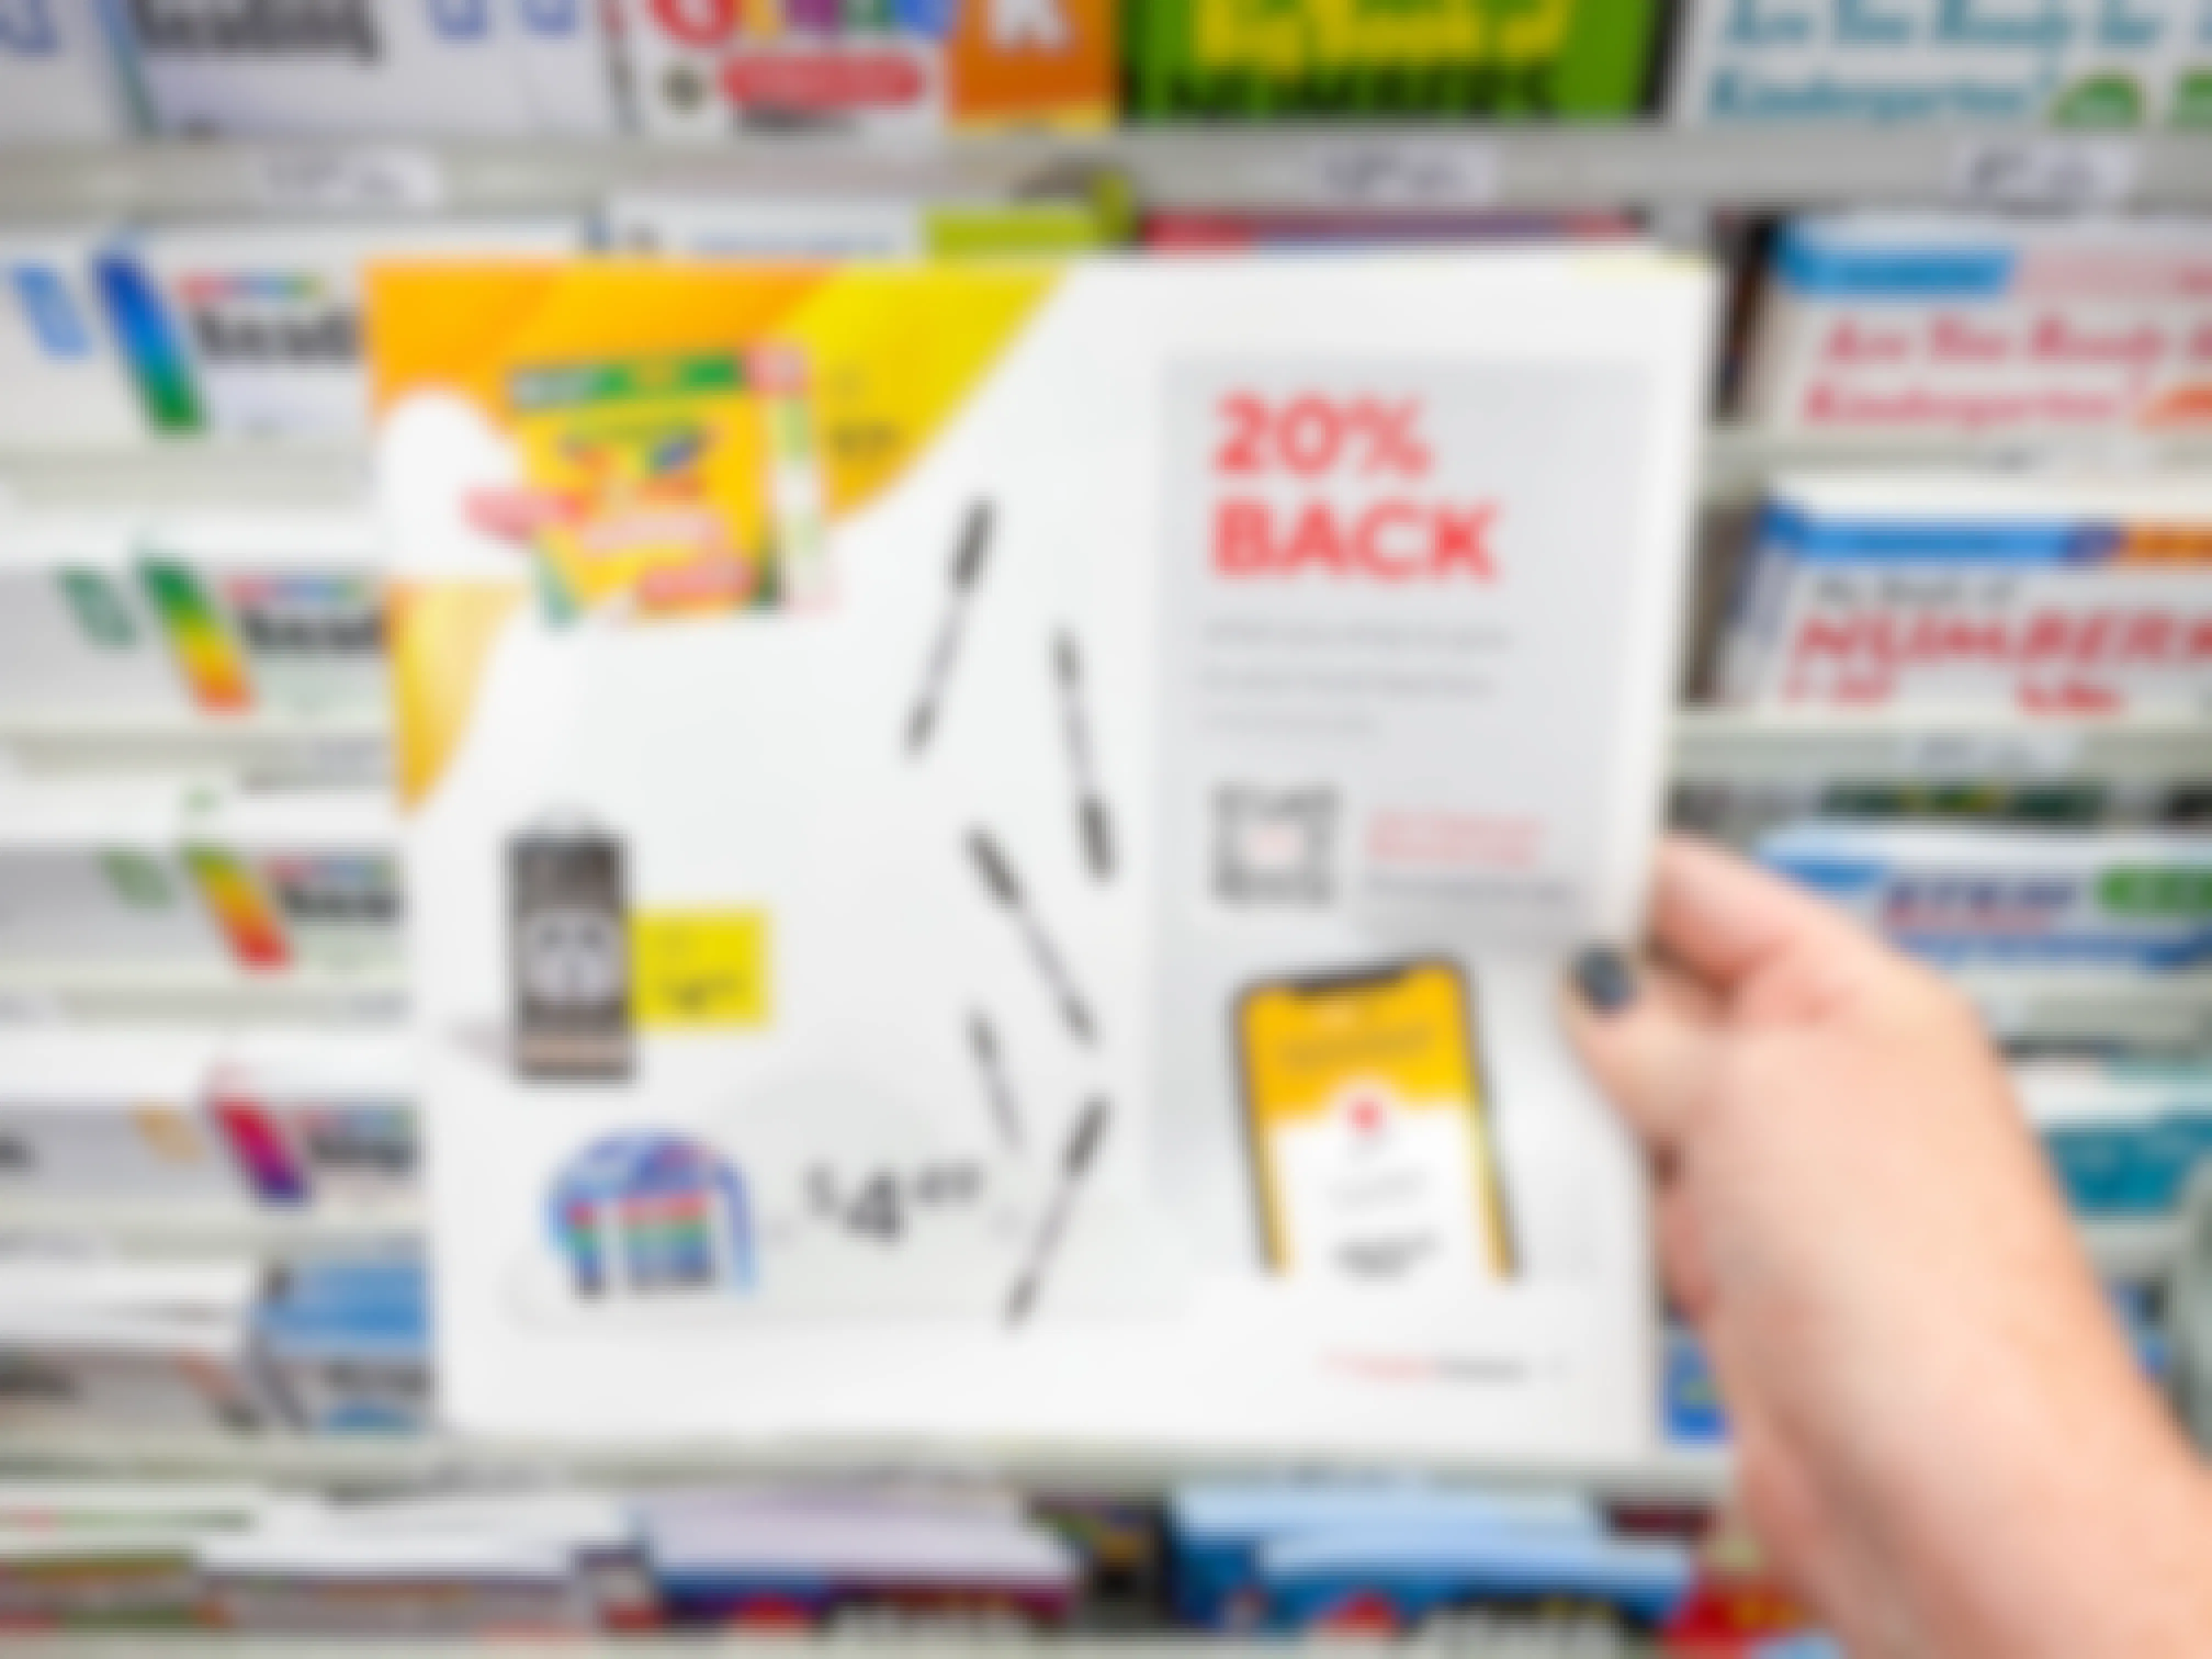 A person's hand holding up a paper advertisement for Classroom Rewards at Staples.